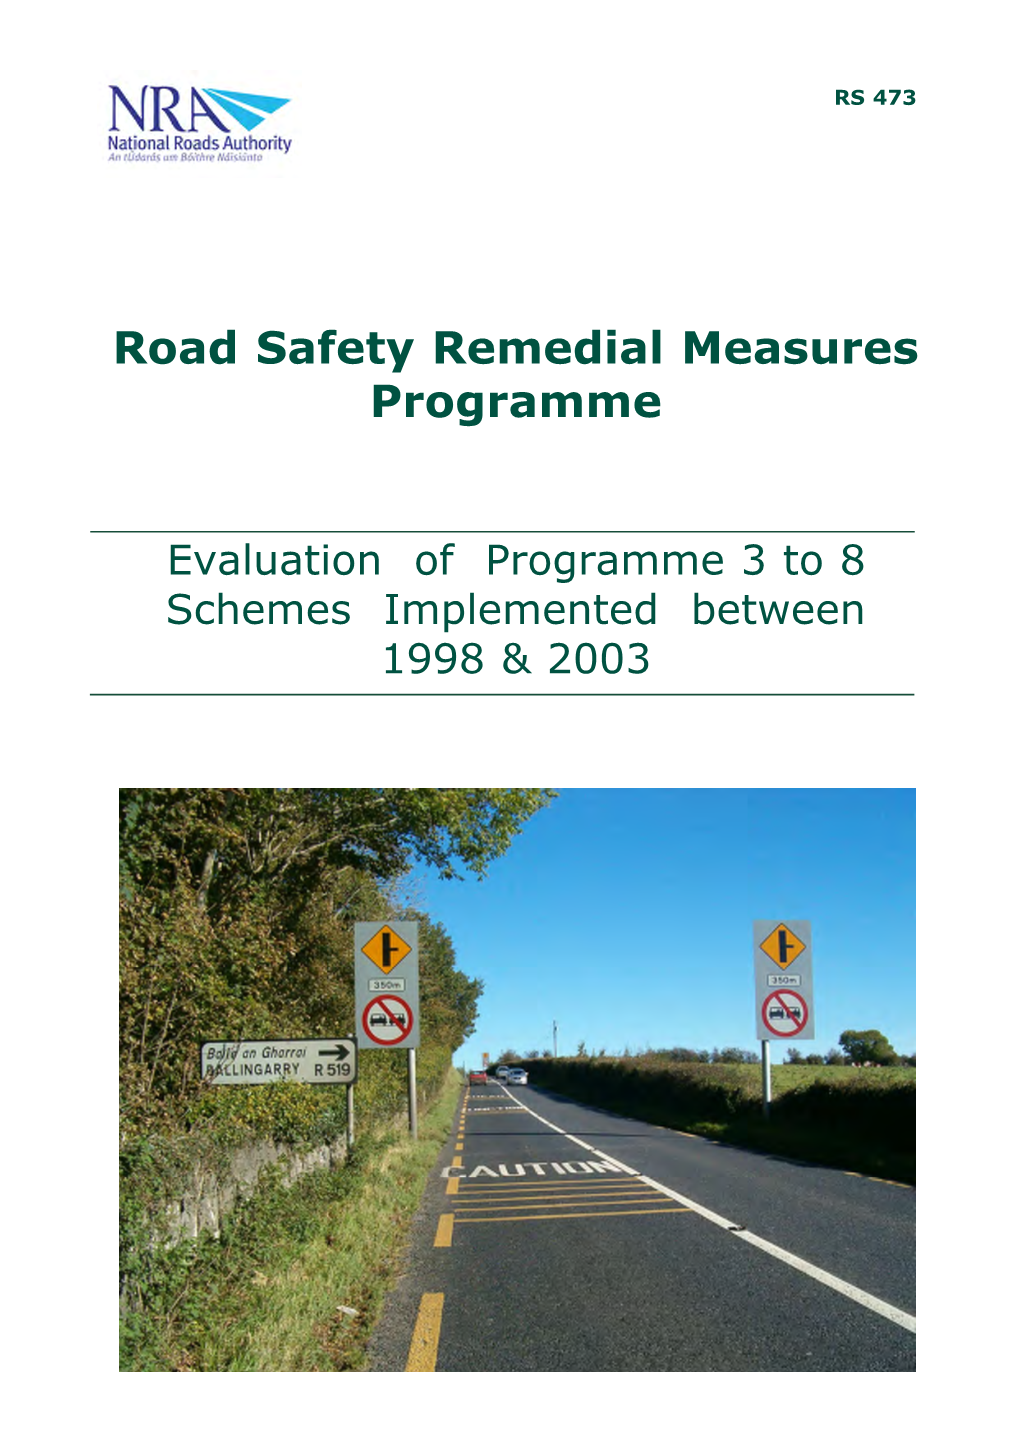 Road Safety Remedial Measures Programme